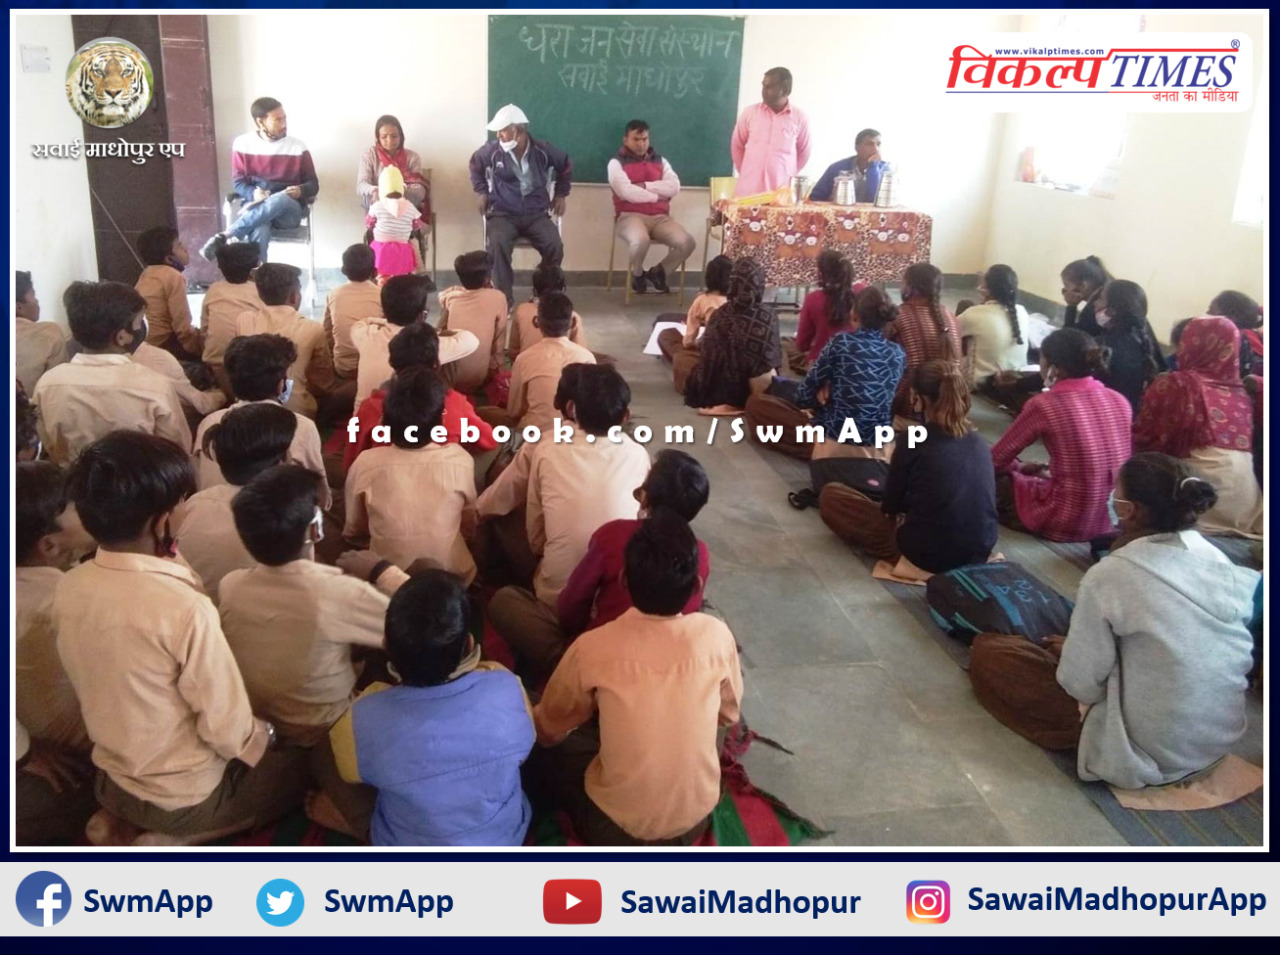 environmental protection Information given to children in sawai madhopur